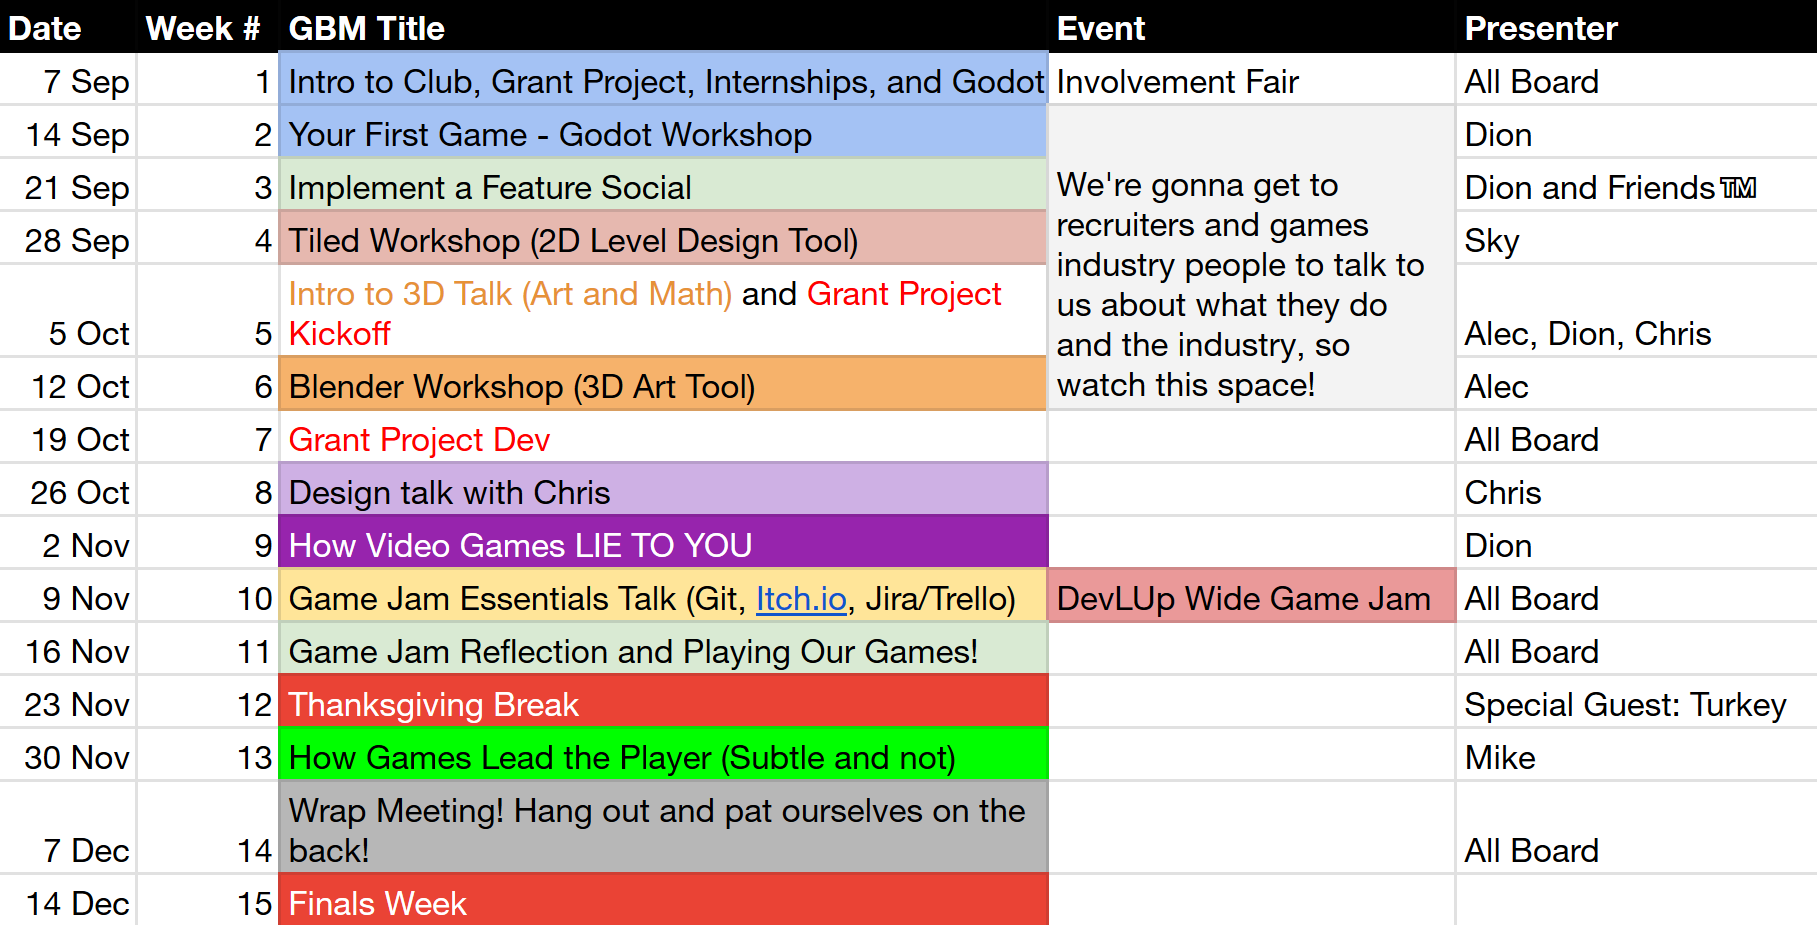 Date	Week #	GBM Title	Event	Presenter
7 Sep	1	Intro to Club, Grant Project, Internships, and Godot	Involvement Fair	All Board
14 Sep	2	Your First Game - Godot Workshop	We're gonna get to recruiters and games industry people to talk to us about what they do and the industry, so watch this space!	Dion
21 Sep	3	Implement a Feature Social		Dion and Friends™️
28 Sep	4	Tiled Workshop (2D Level Design Tool)		Sky
5 Oct	5	Intro to 3D Talk (Art and Math) and Grant Project Kickoff		Alec, Dion, Chris
12 Oct	6	Blender Workshop (3D Art Tool)		Alec
19 Oct	7	Grant Project Dev		All Board
26 Oct	8	Design talk with Chris		Chris
2 Nov	9	How Video Games LIE TO YOU		Dion
9 Nov	10	Game Jam Essentials Talk (Git, Itch.io, Jira/Trello)	DevLUp Wide Game Jam	All Board
16 Nov	11	Game Jam Reflection and Playing Our Games!		All Board
23 Nov	12	Thanksgiving Break		Special Guest: Turkey
30 Nov	13	How Games Lead the Player (Subtle and not)		Mike
7 Dec	14	Wrap Meeting! Hang out and pat ourselves on the back!		All Board
14 Dec	15	Finals Week		